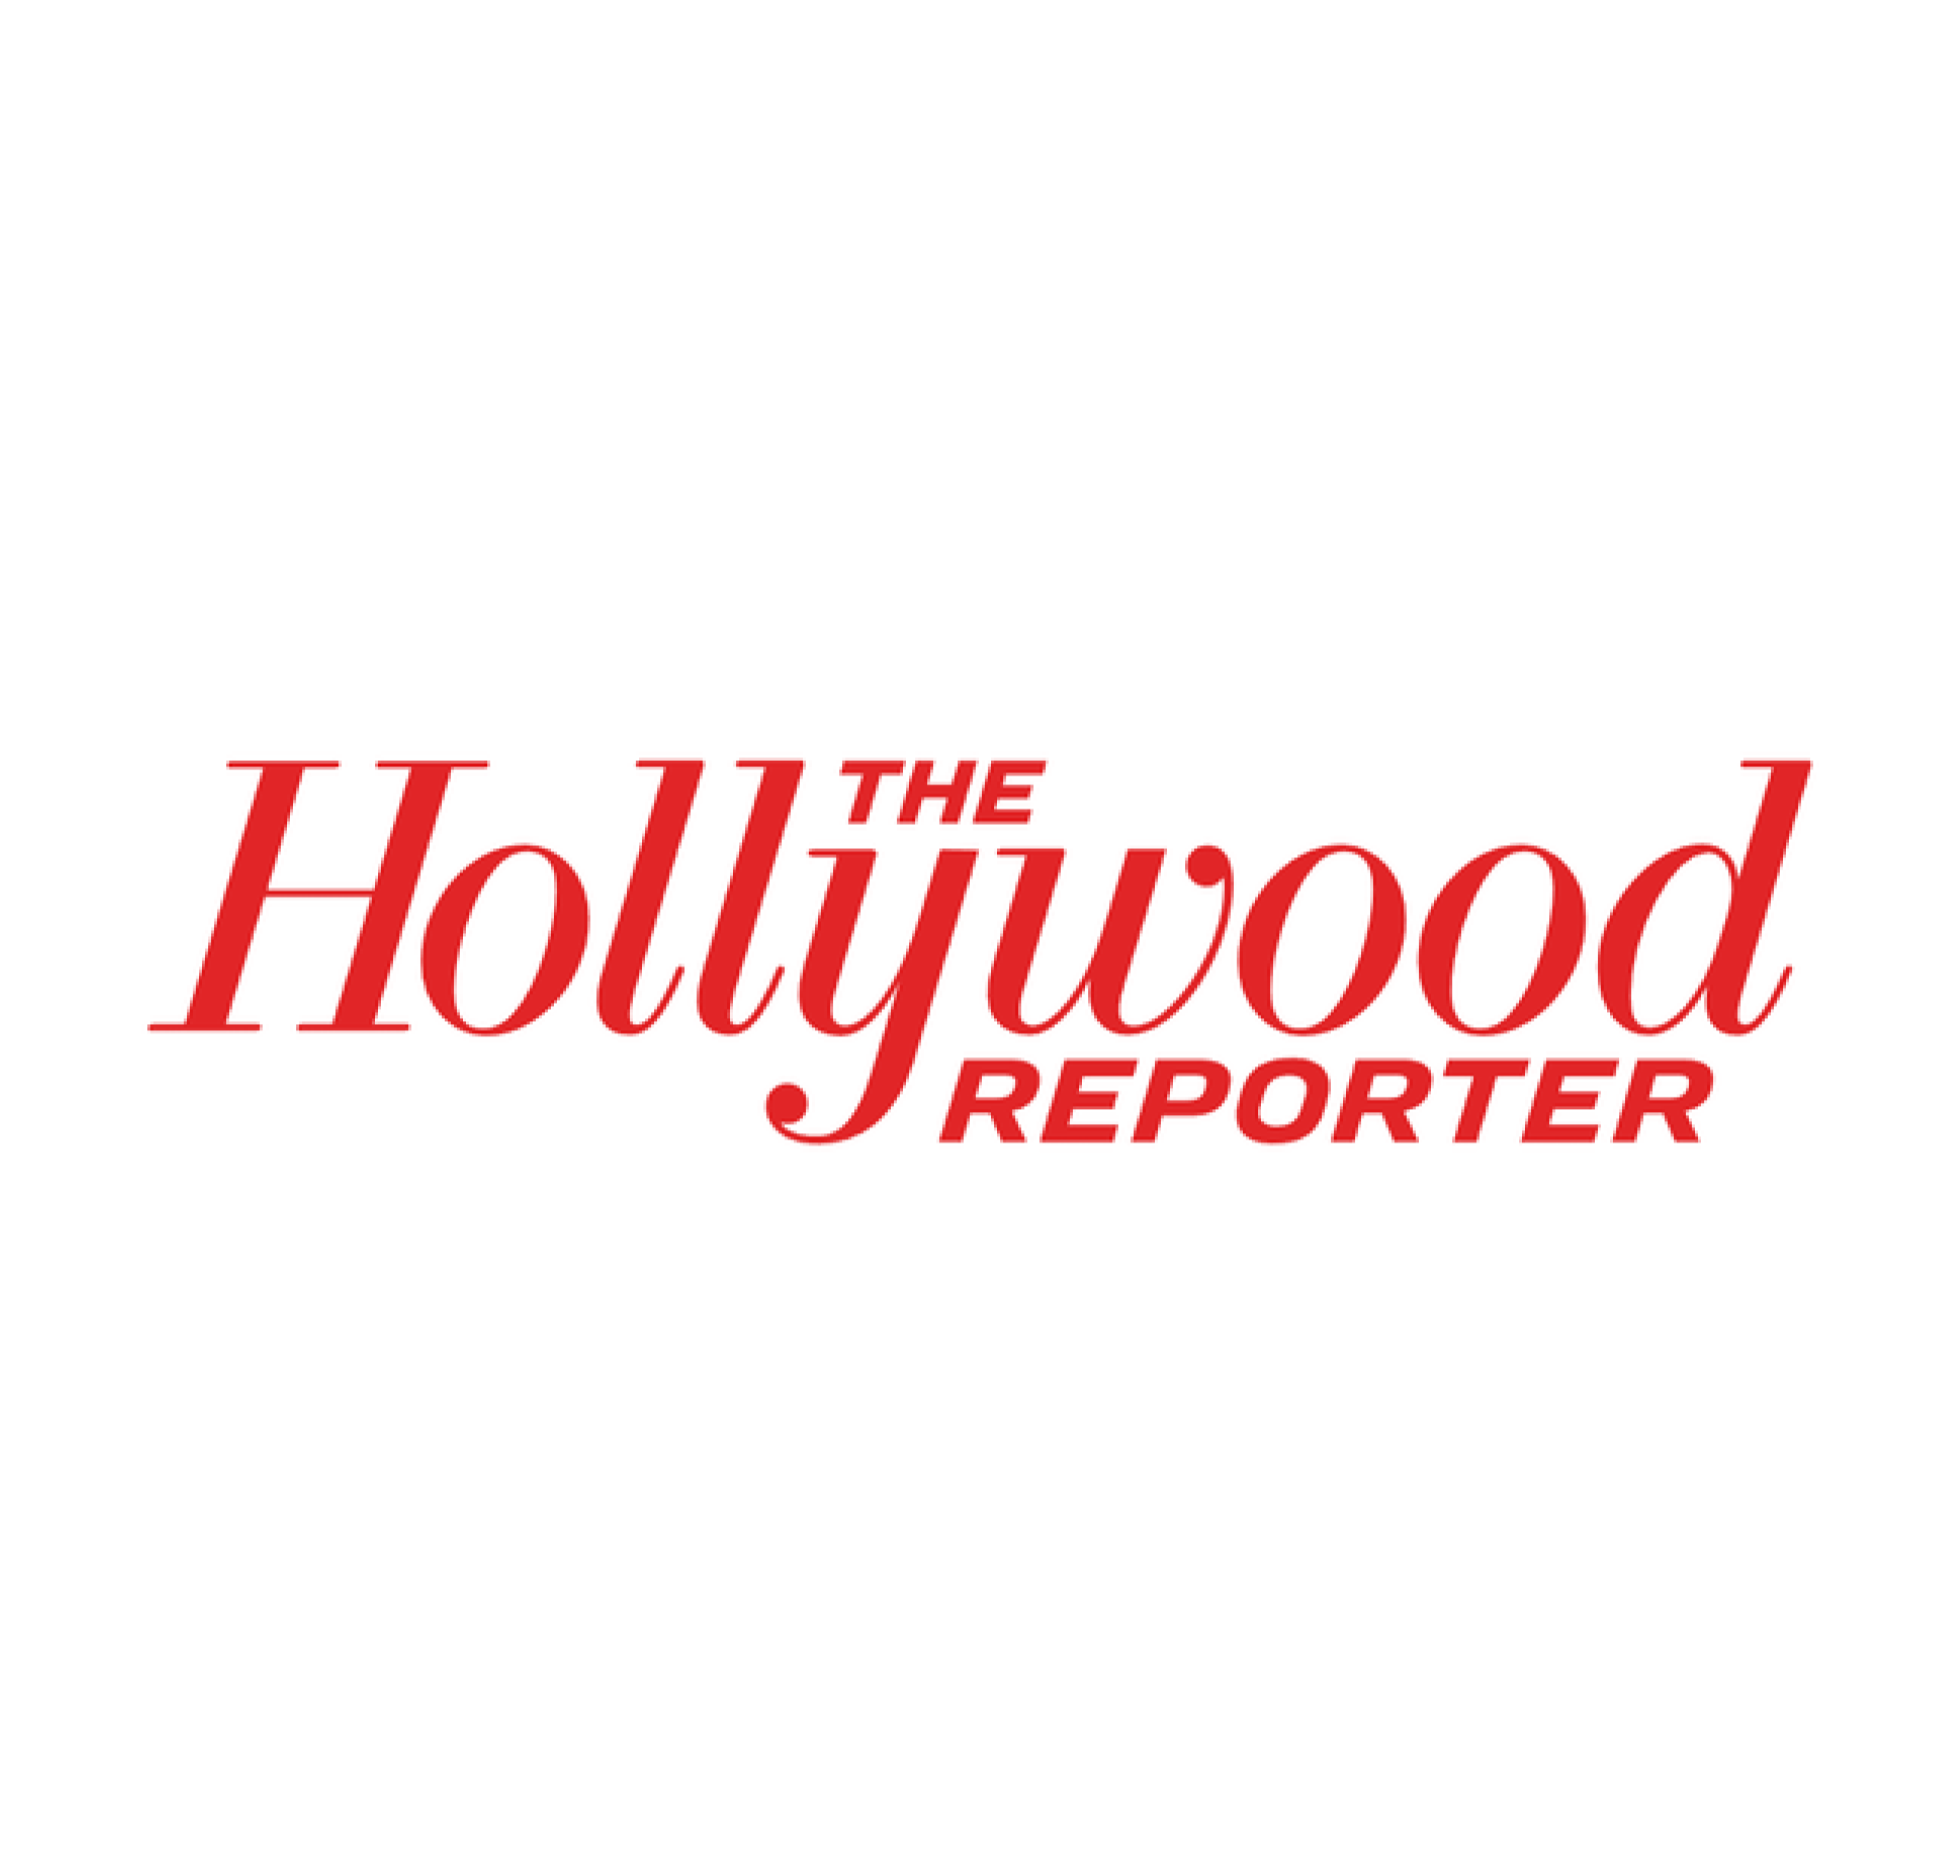 IAPW In the Press | The Hollywood Reporter